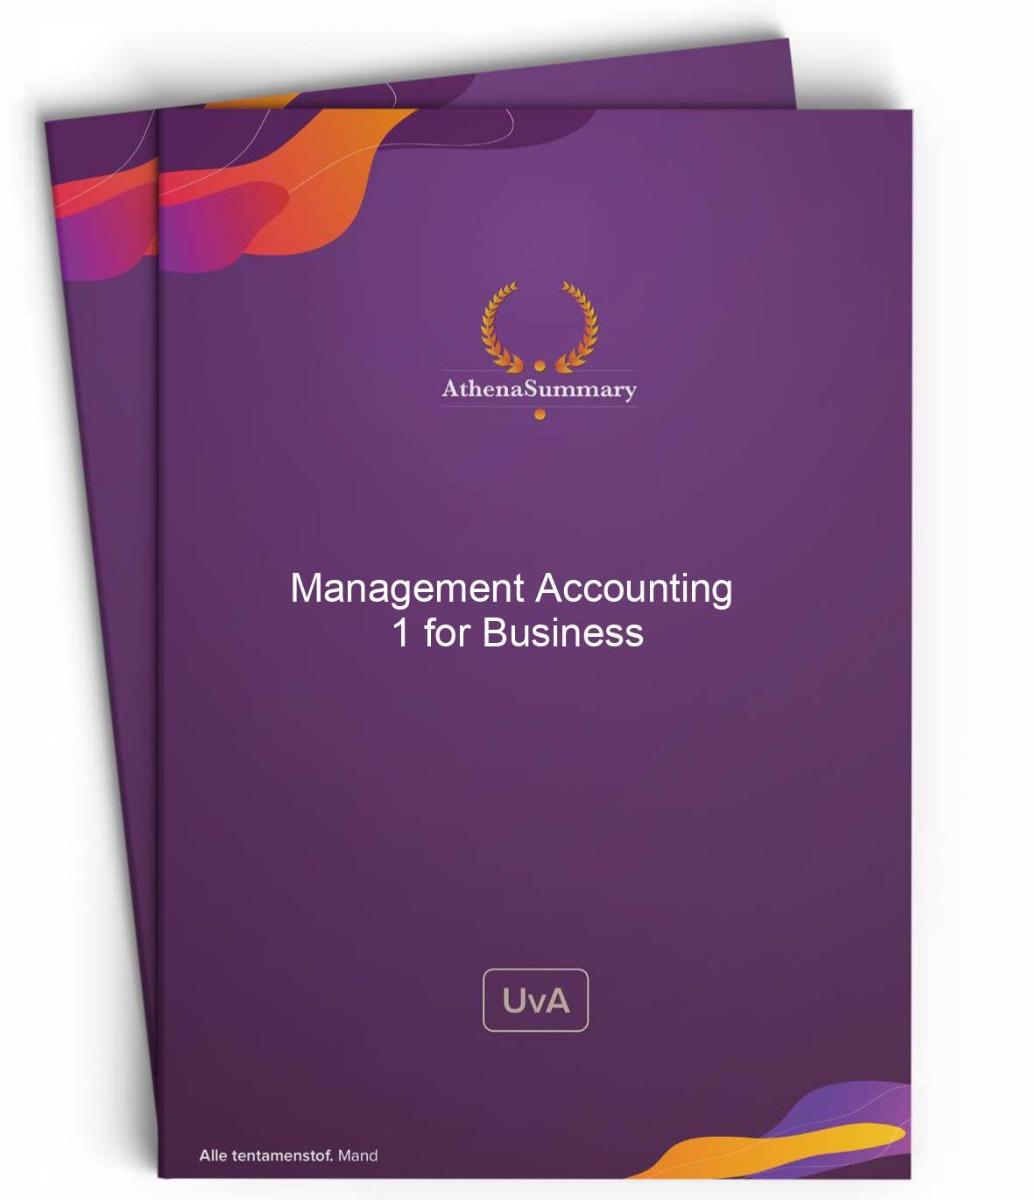 Literature Summary: Management Accounting 1 for Business